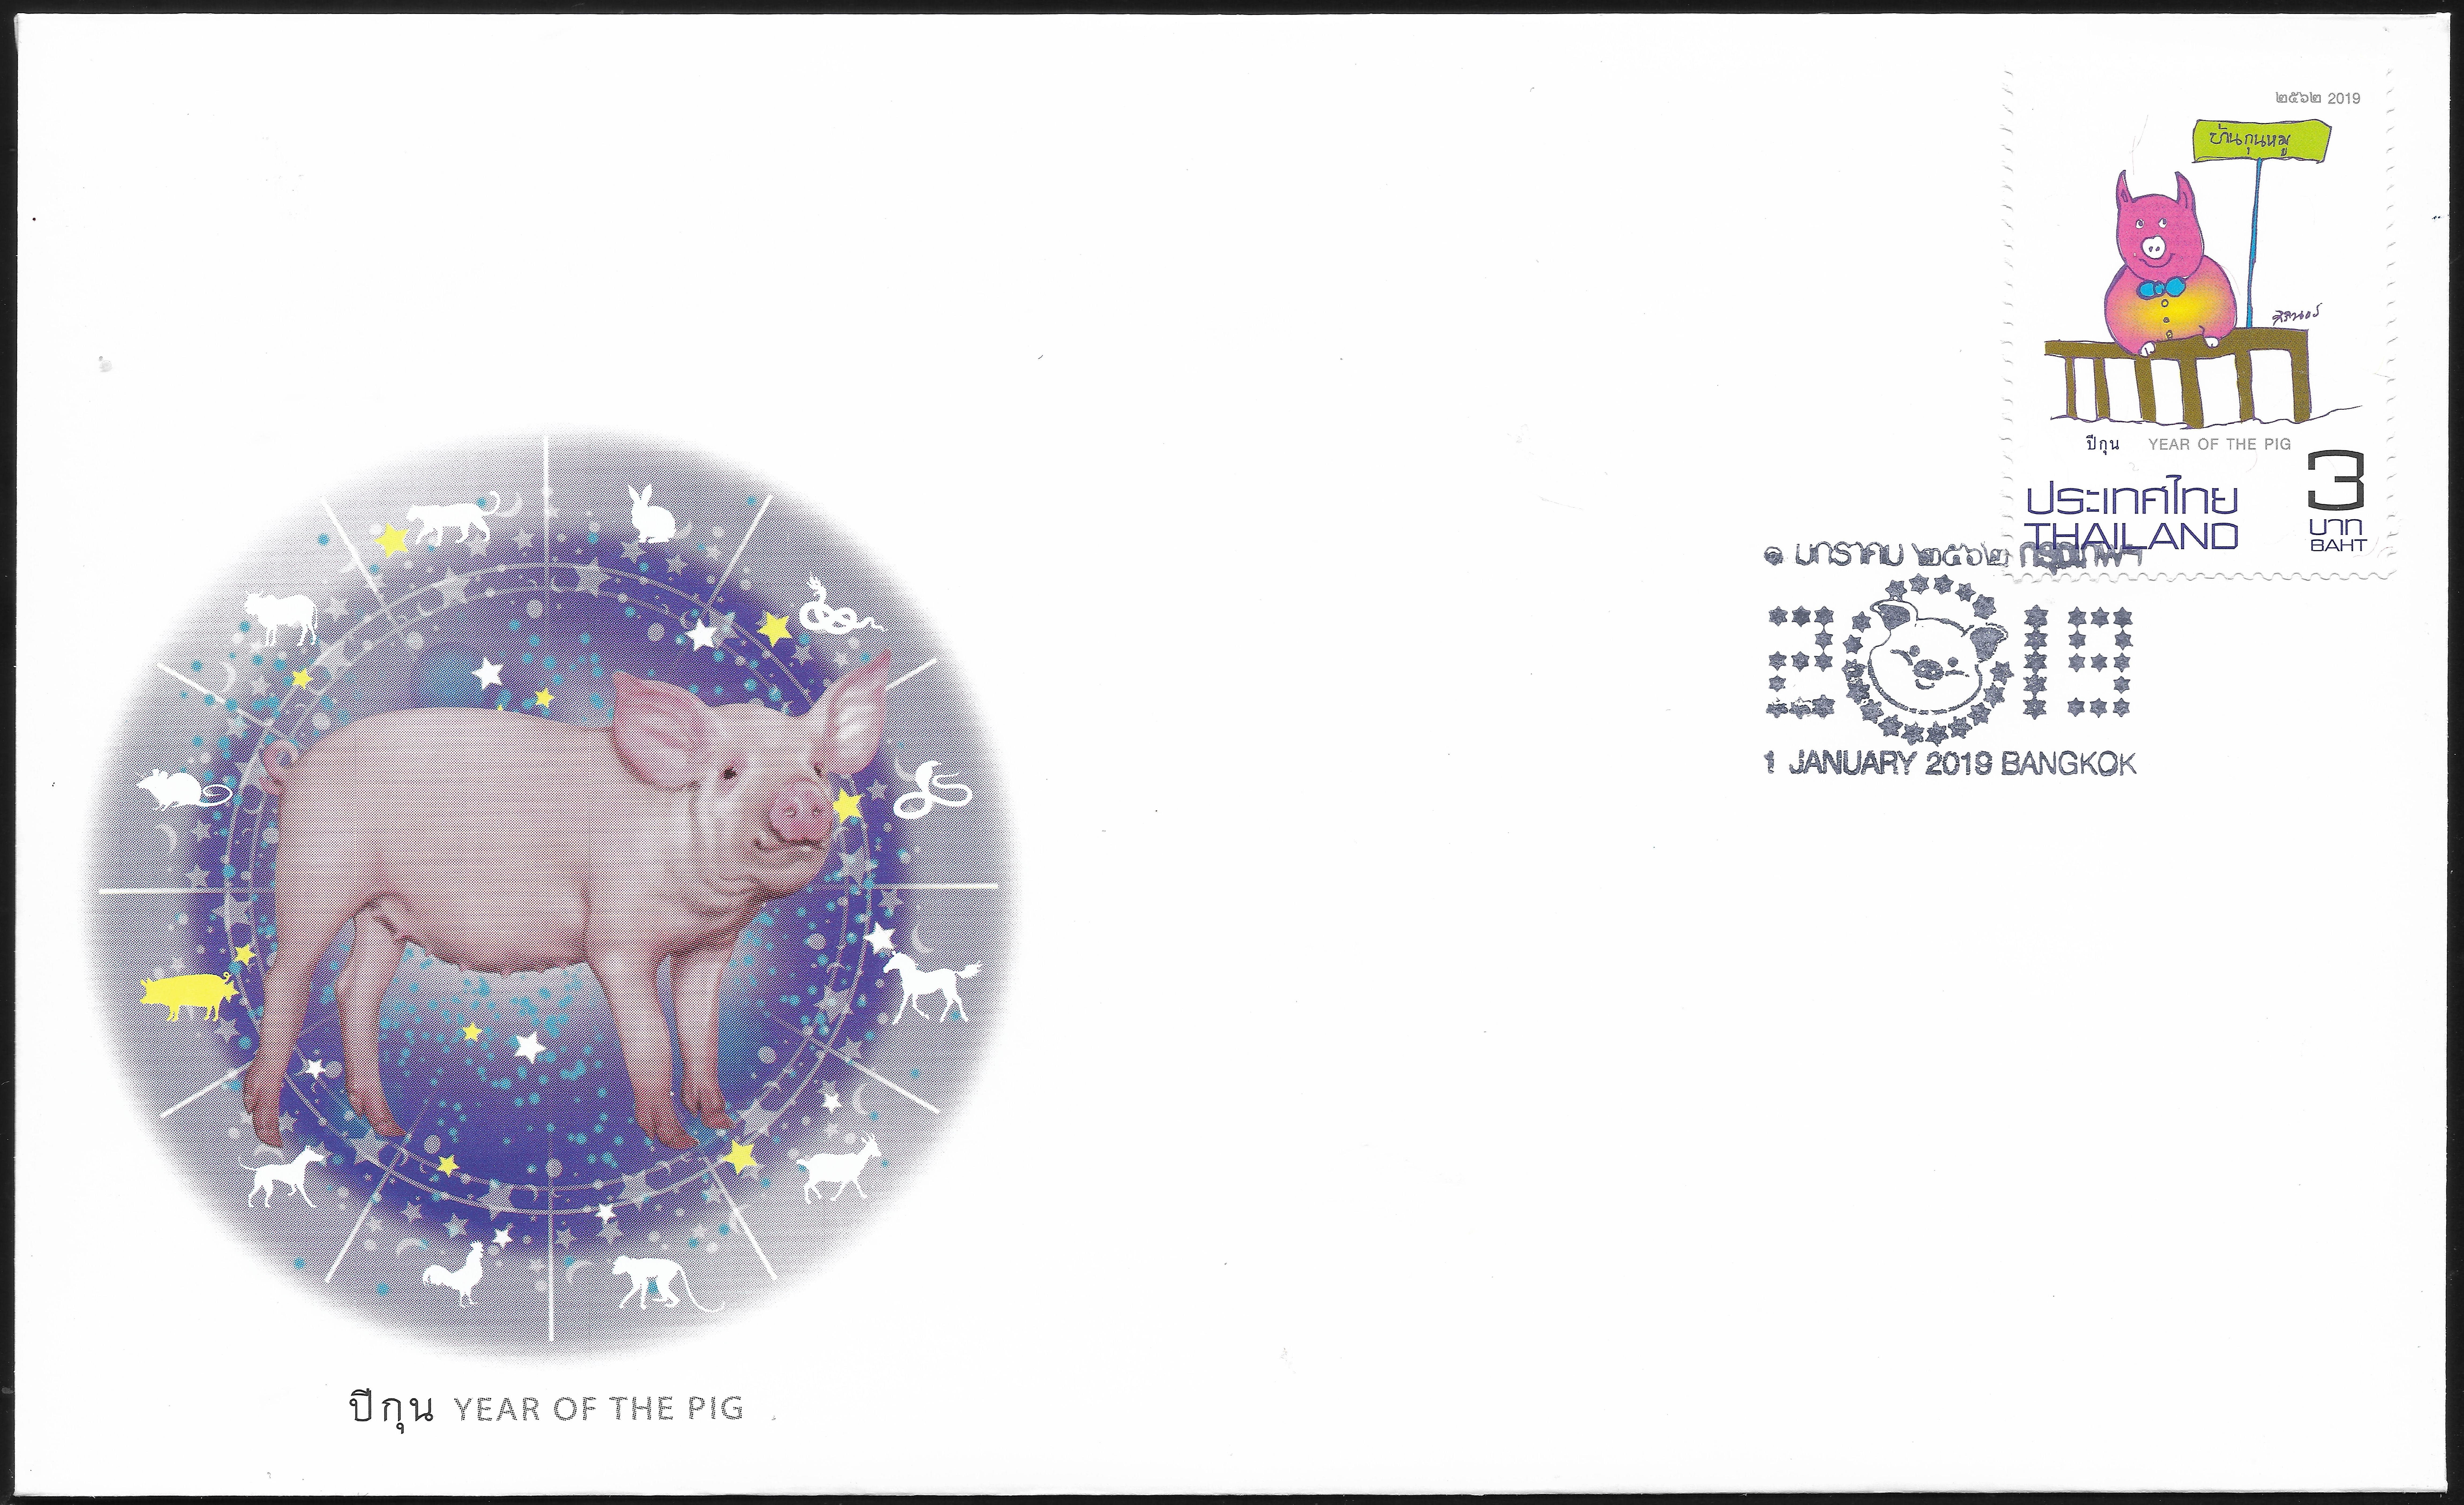 Thailand - Thailand Post #TH-11162 (2019) first day cover